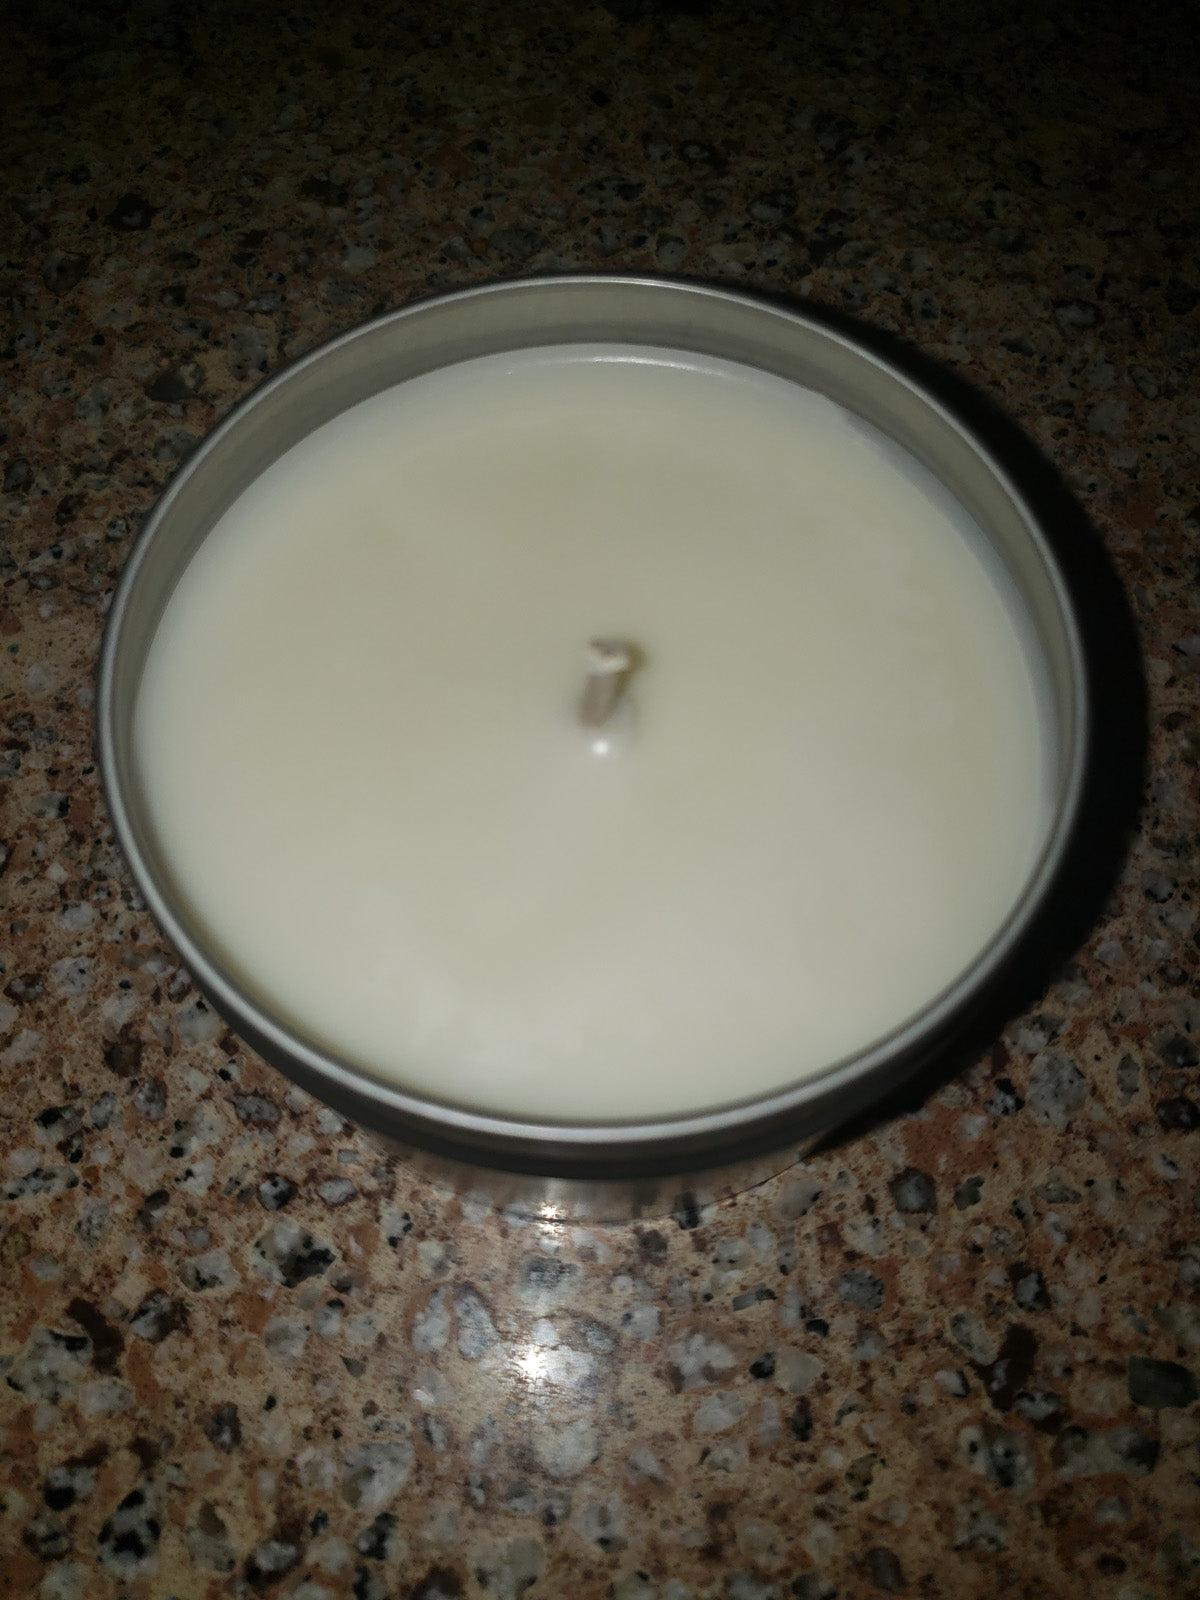 RESCUE RAGZ BLUEBERRY CHEESECAKE SOY CANDLE